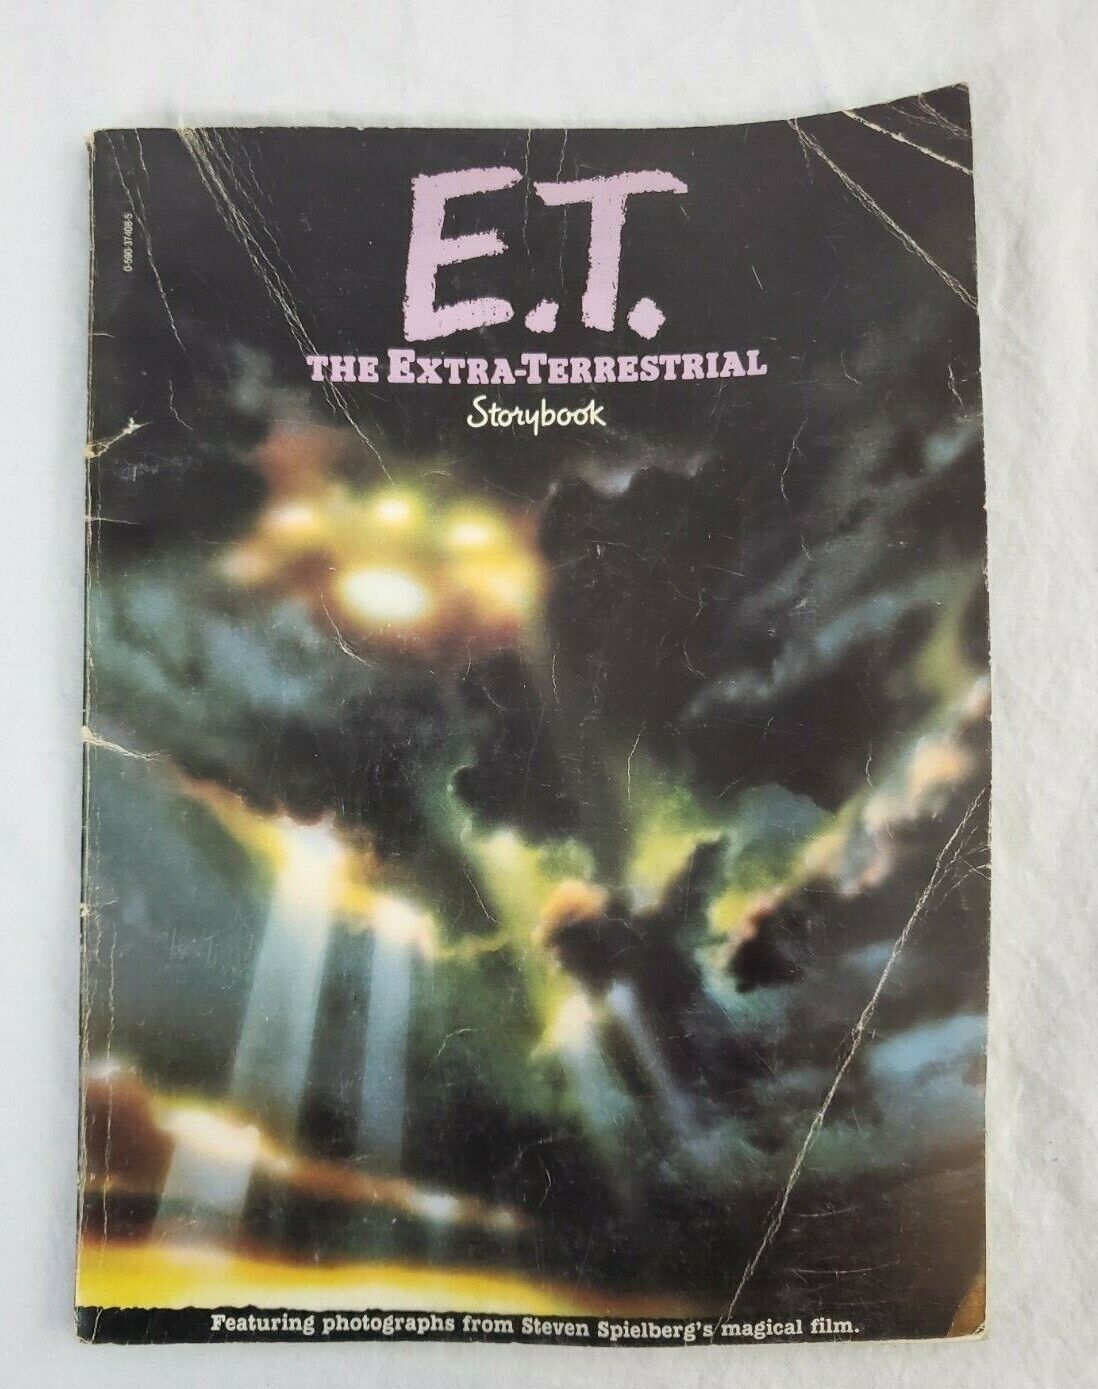 VINTAGE E.T. The Extra-Terrestrial Storybook 1982 Scholastic Book